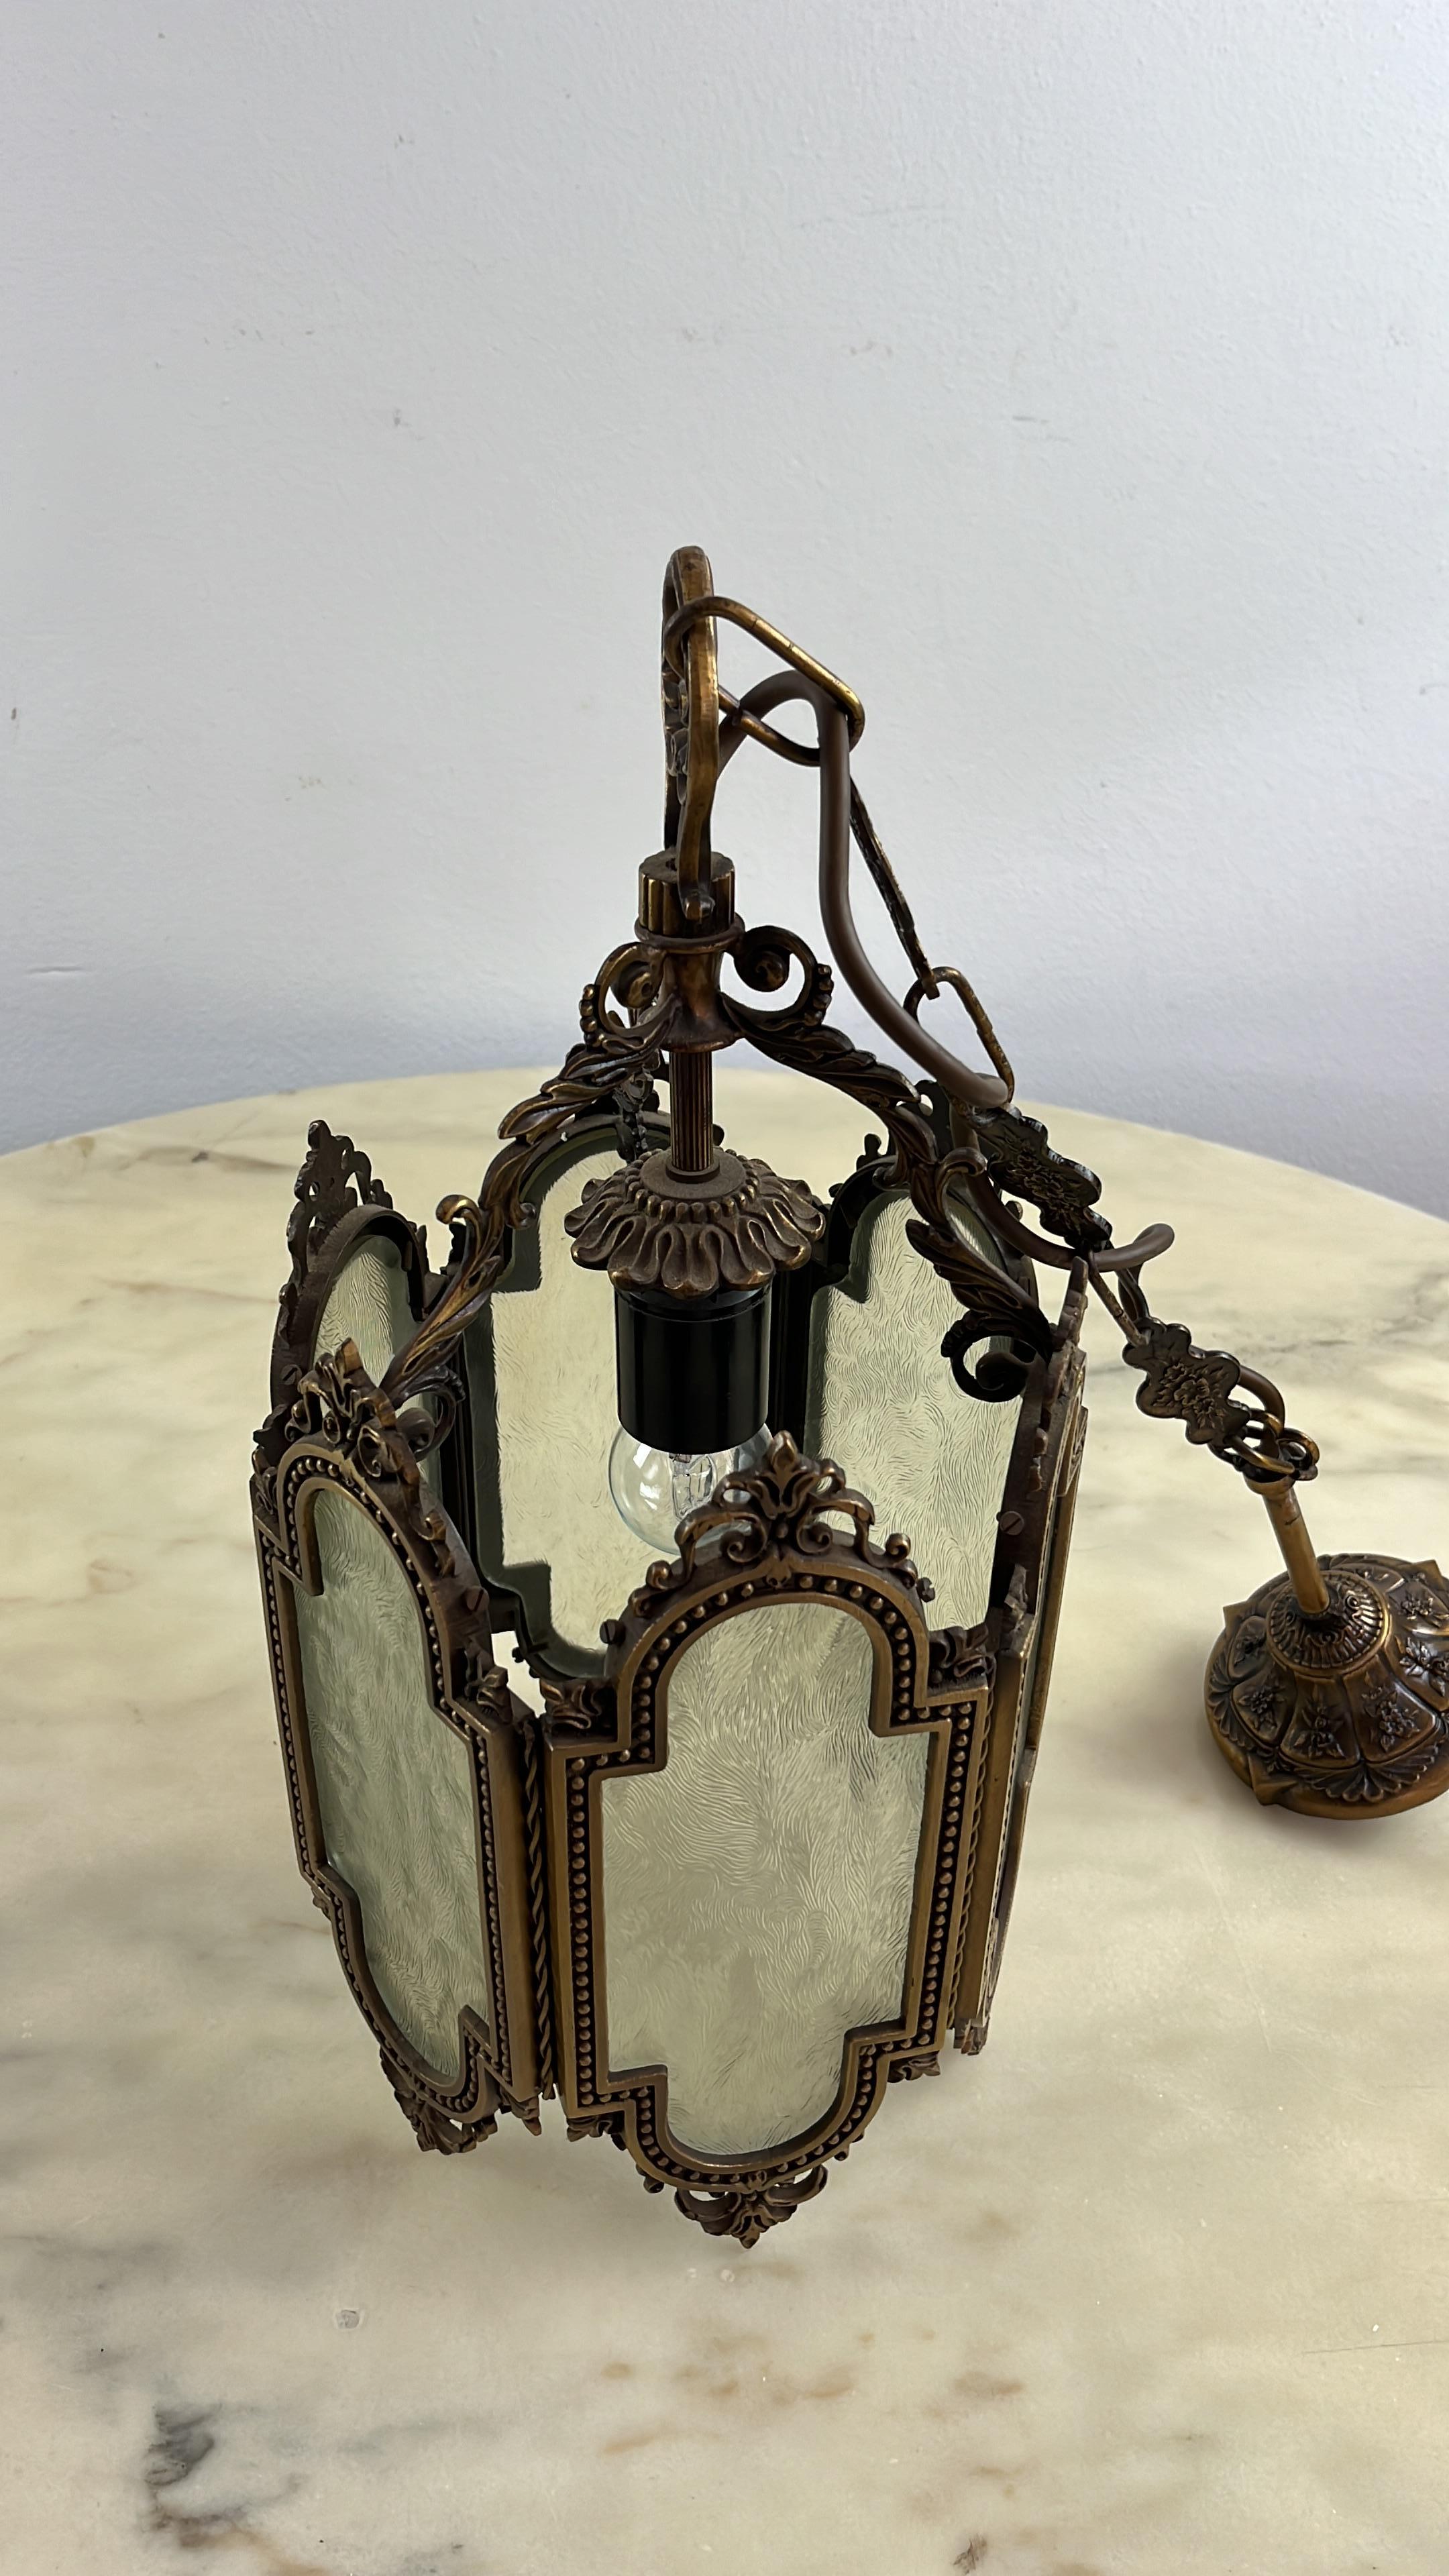 Vintage bronze chandelier, Italy, 70s
Intact and functioning. Height with chain 92 cm.